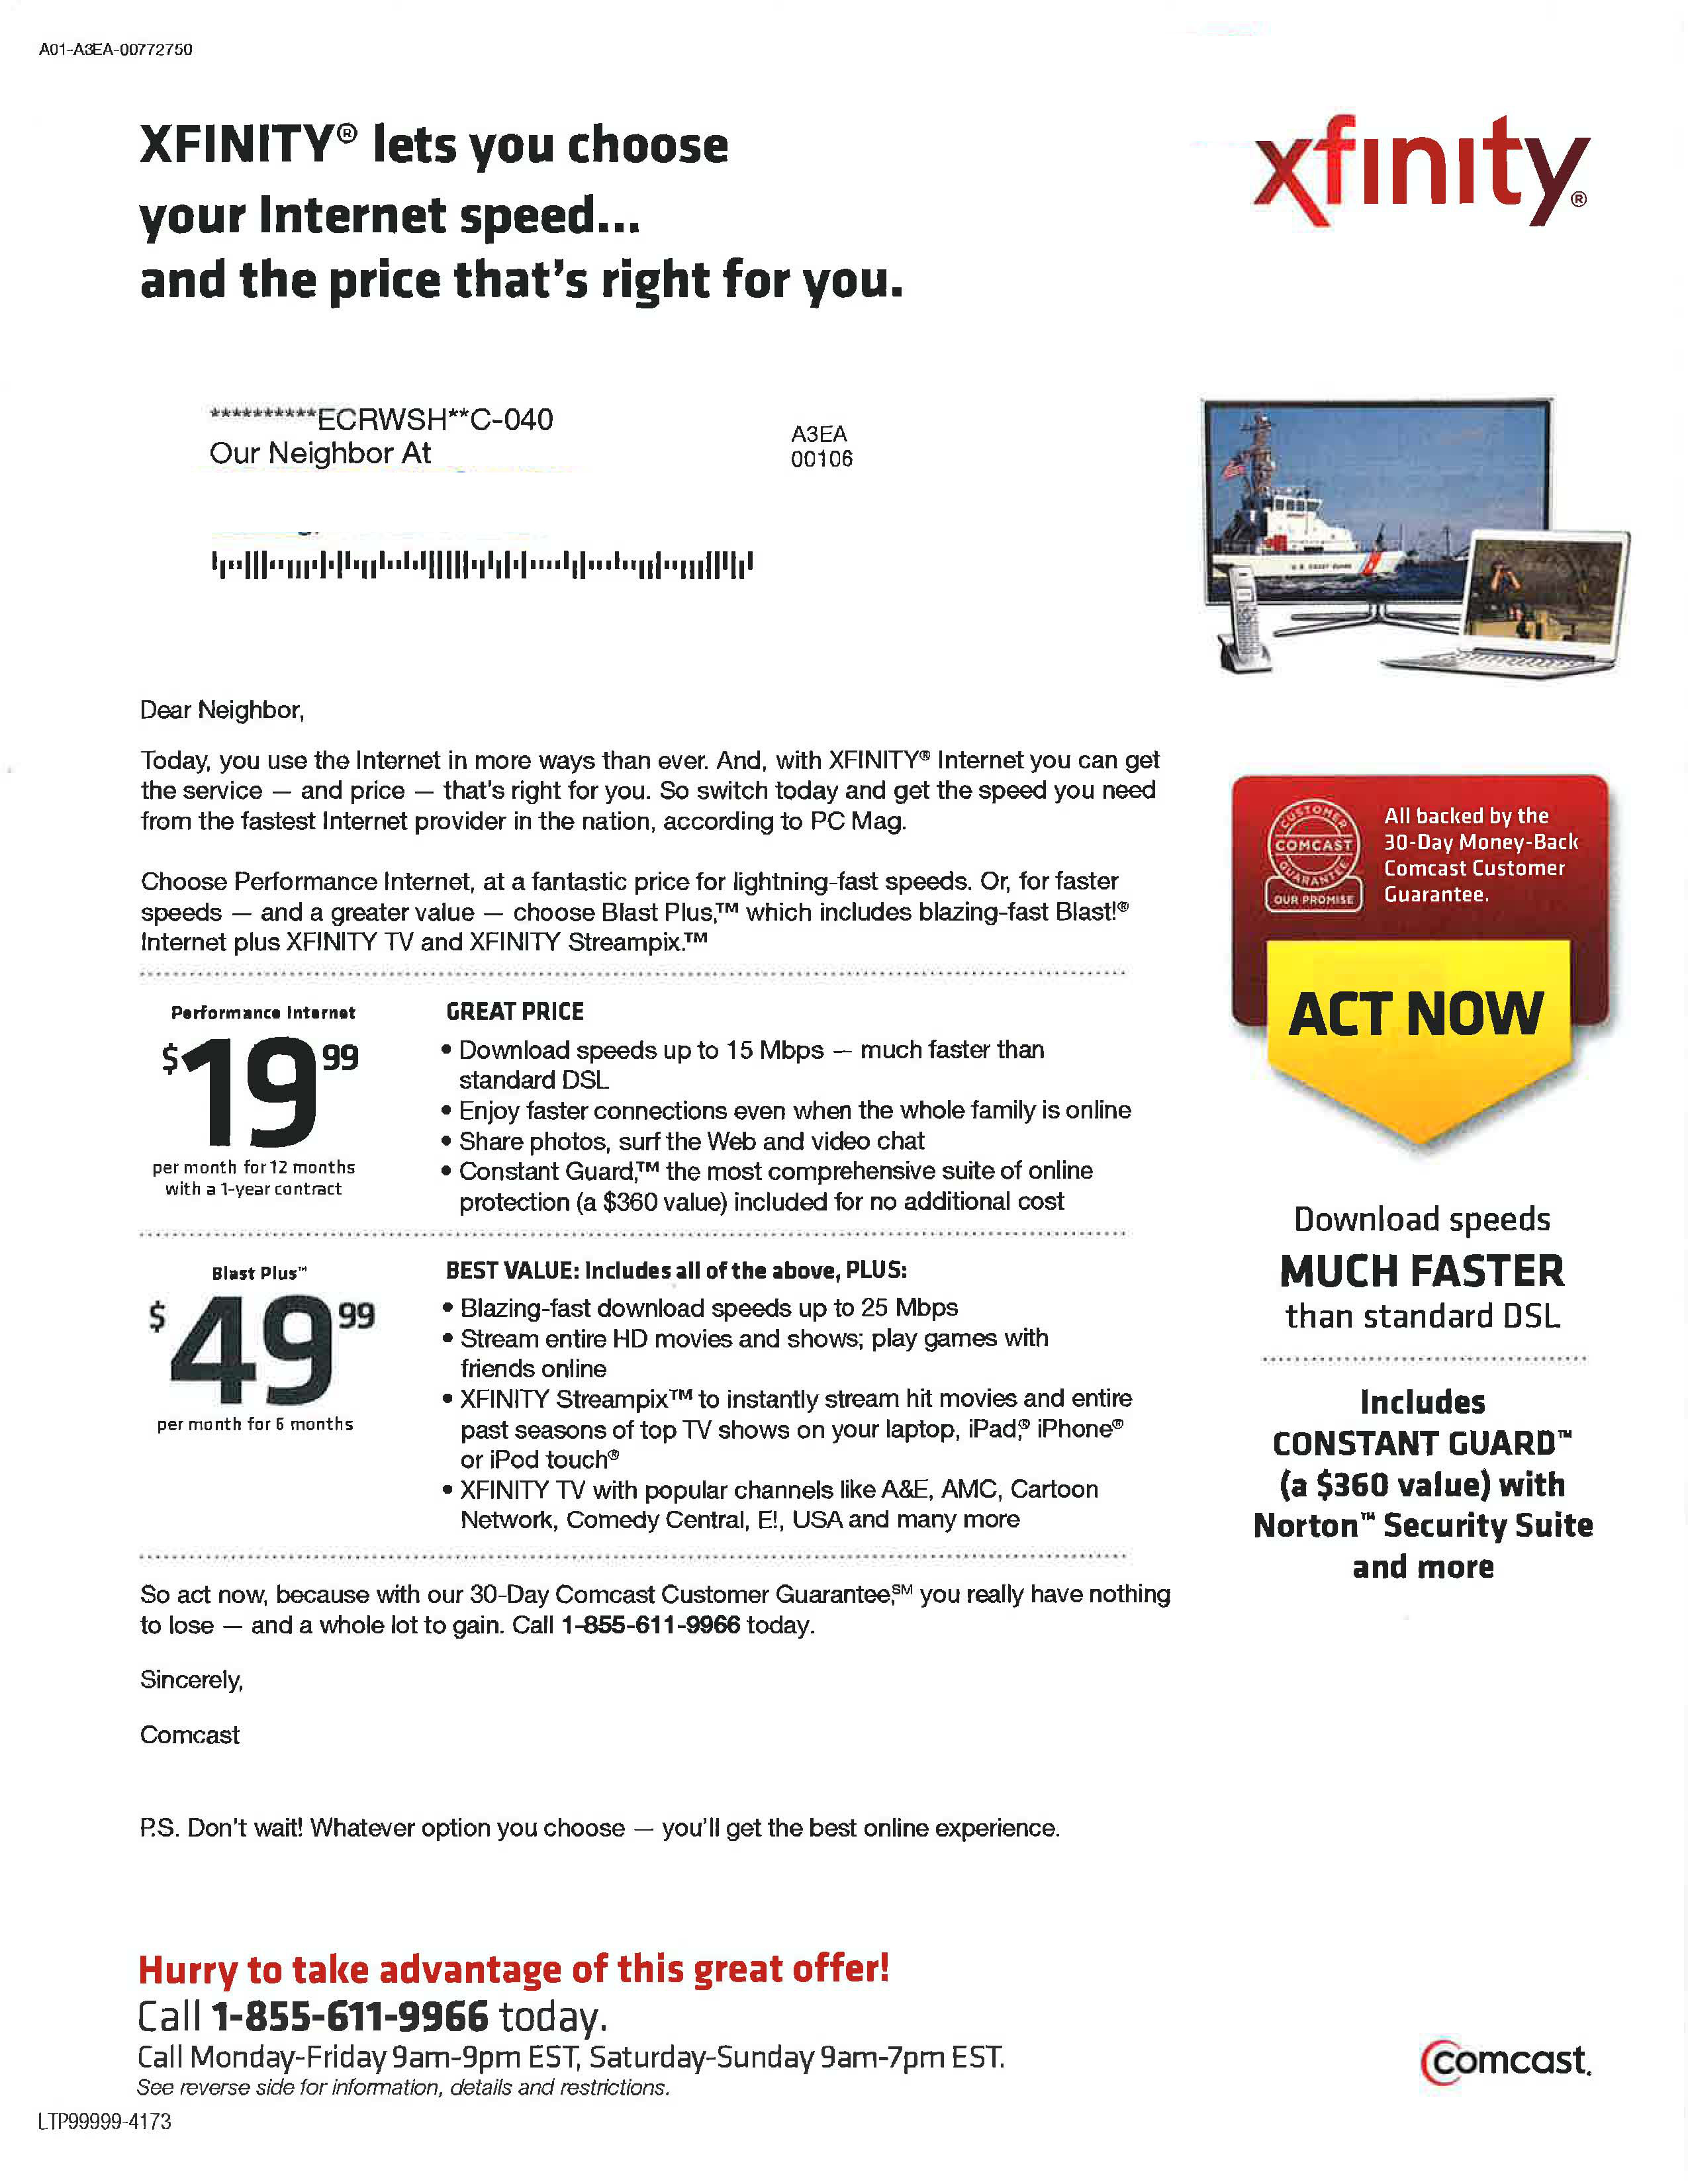 Comcast Xfinity Performance Internet $19.99 for 12 Months ends 7/29/12